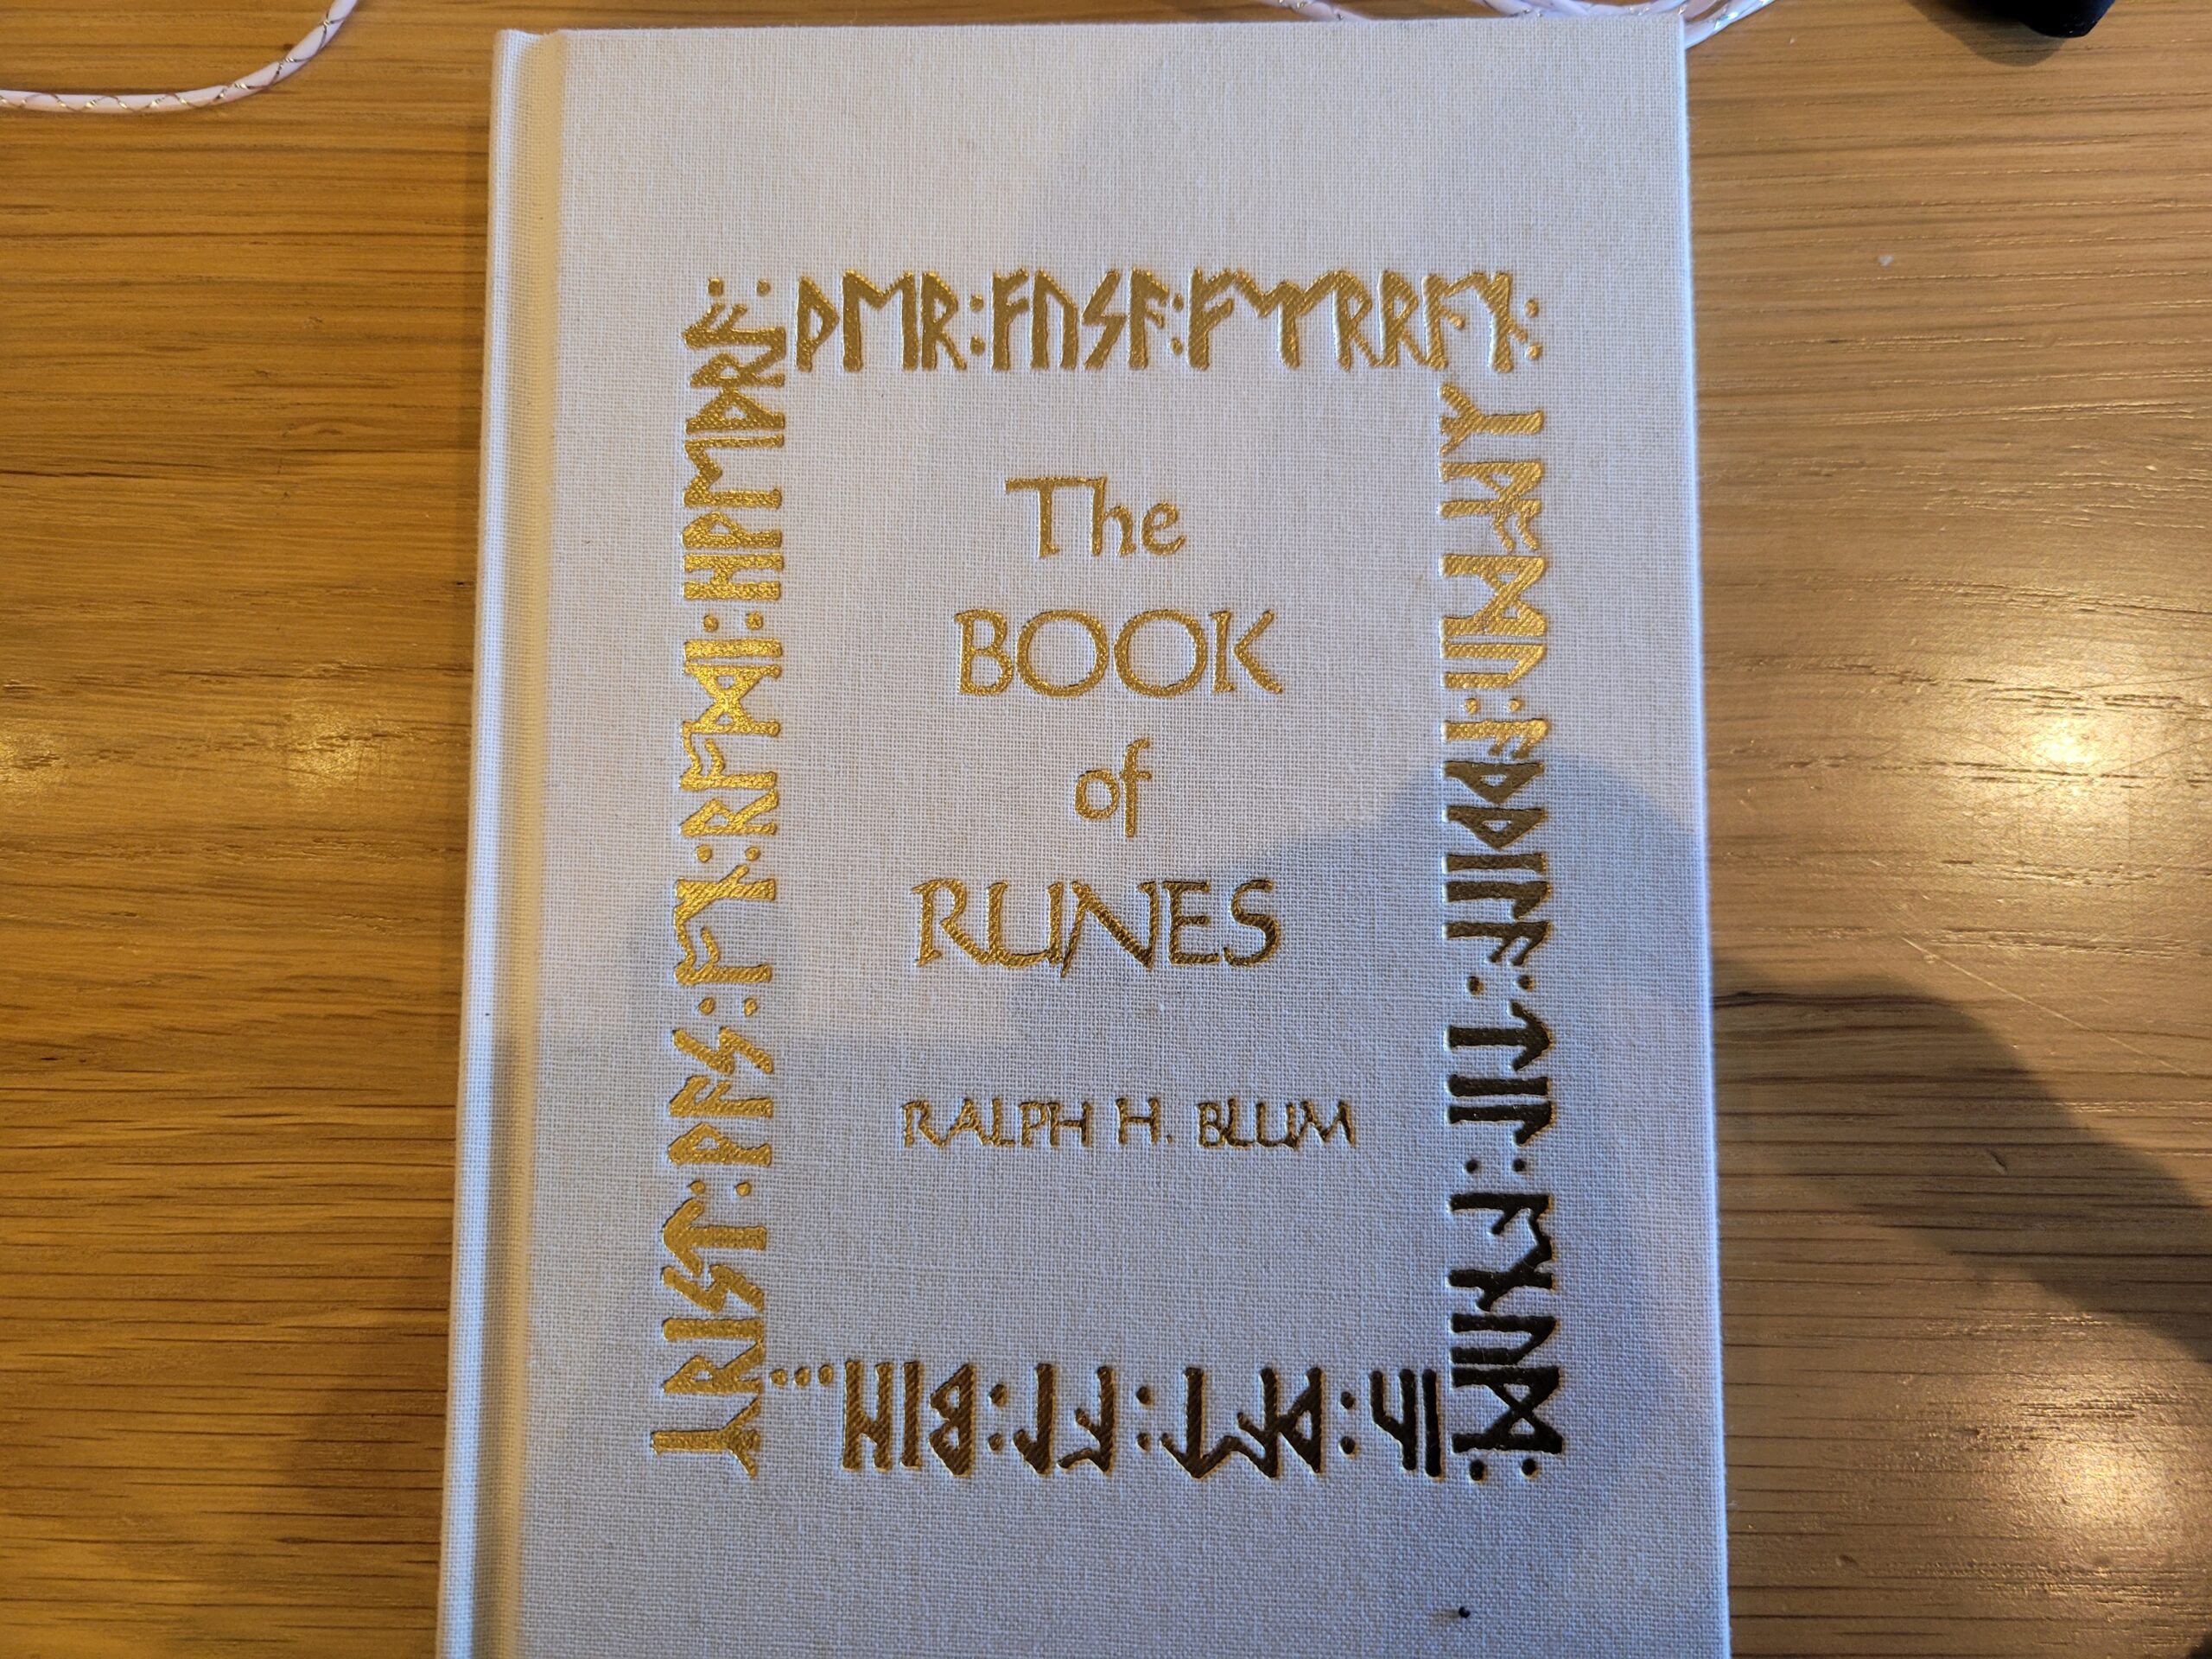 Visual Reference for “The Book of Runes” by Ralph H. Blum for Wisdom Open Reading Dialog (WORD) By UniquilibriuM